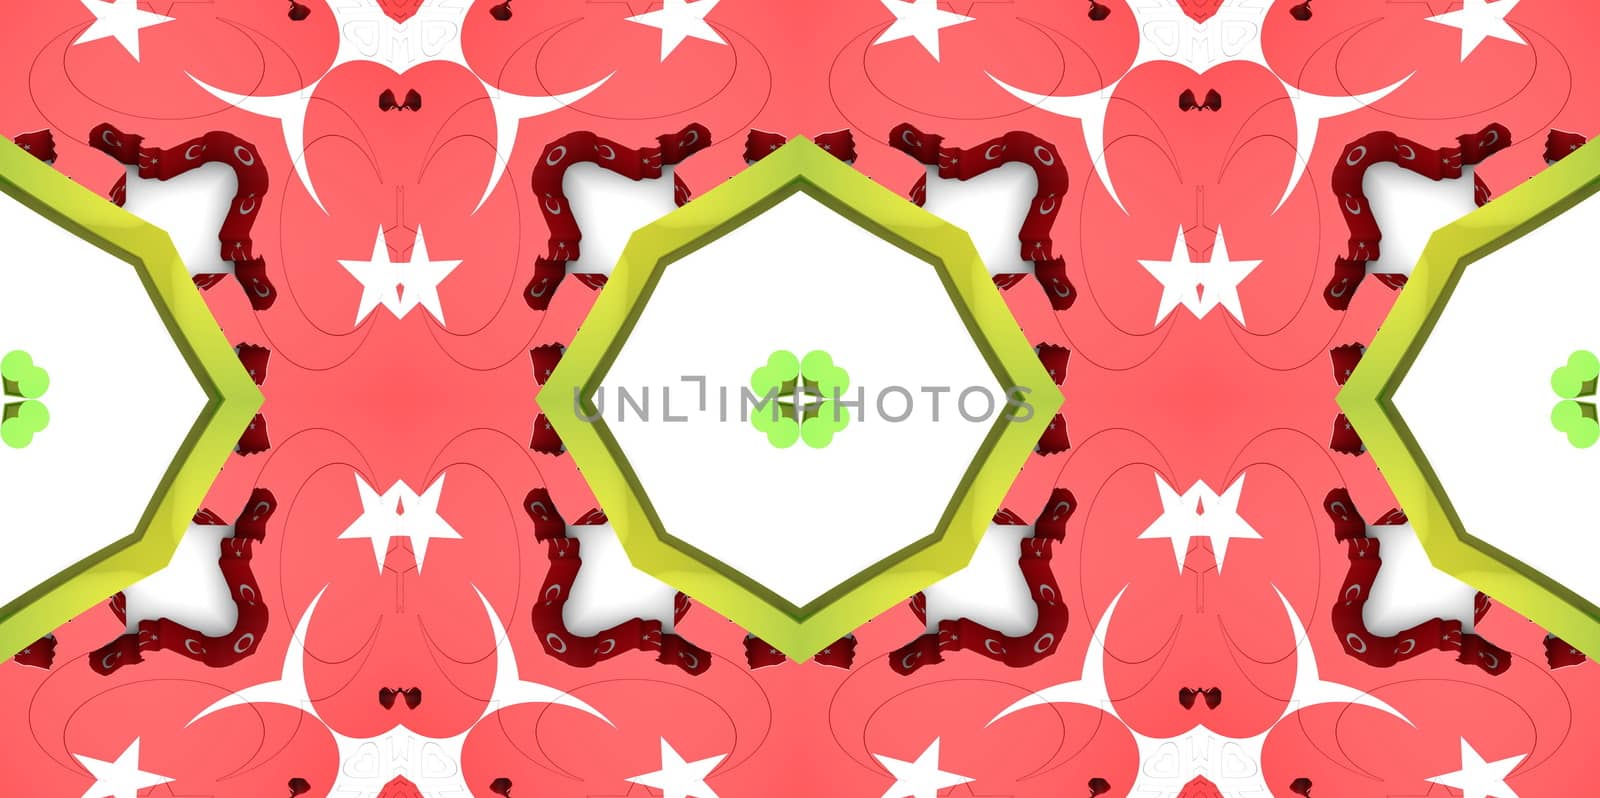 red Ethnic pattern. Abstract kaleidoscope fabric design.